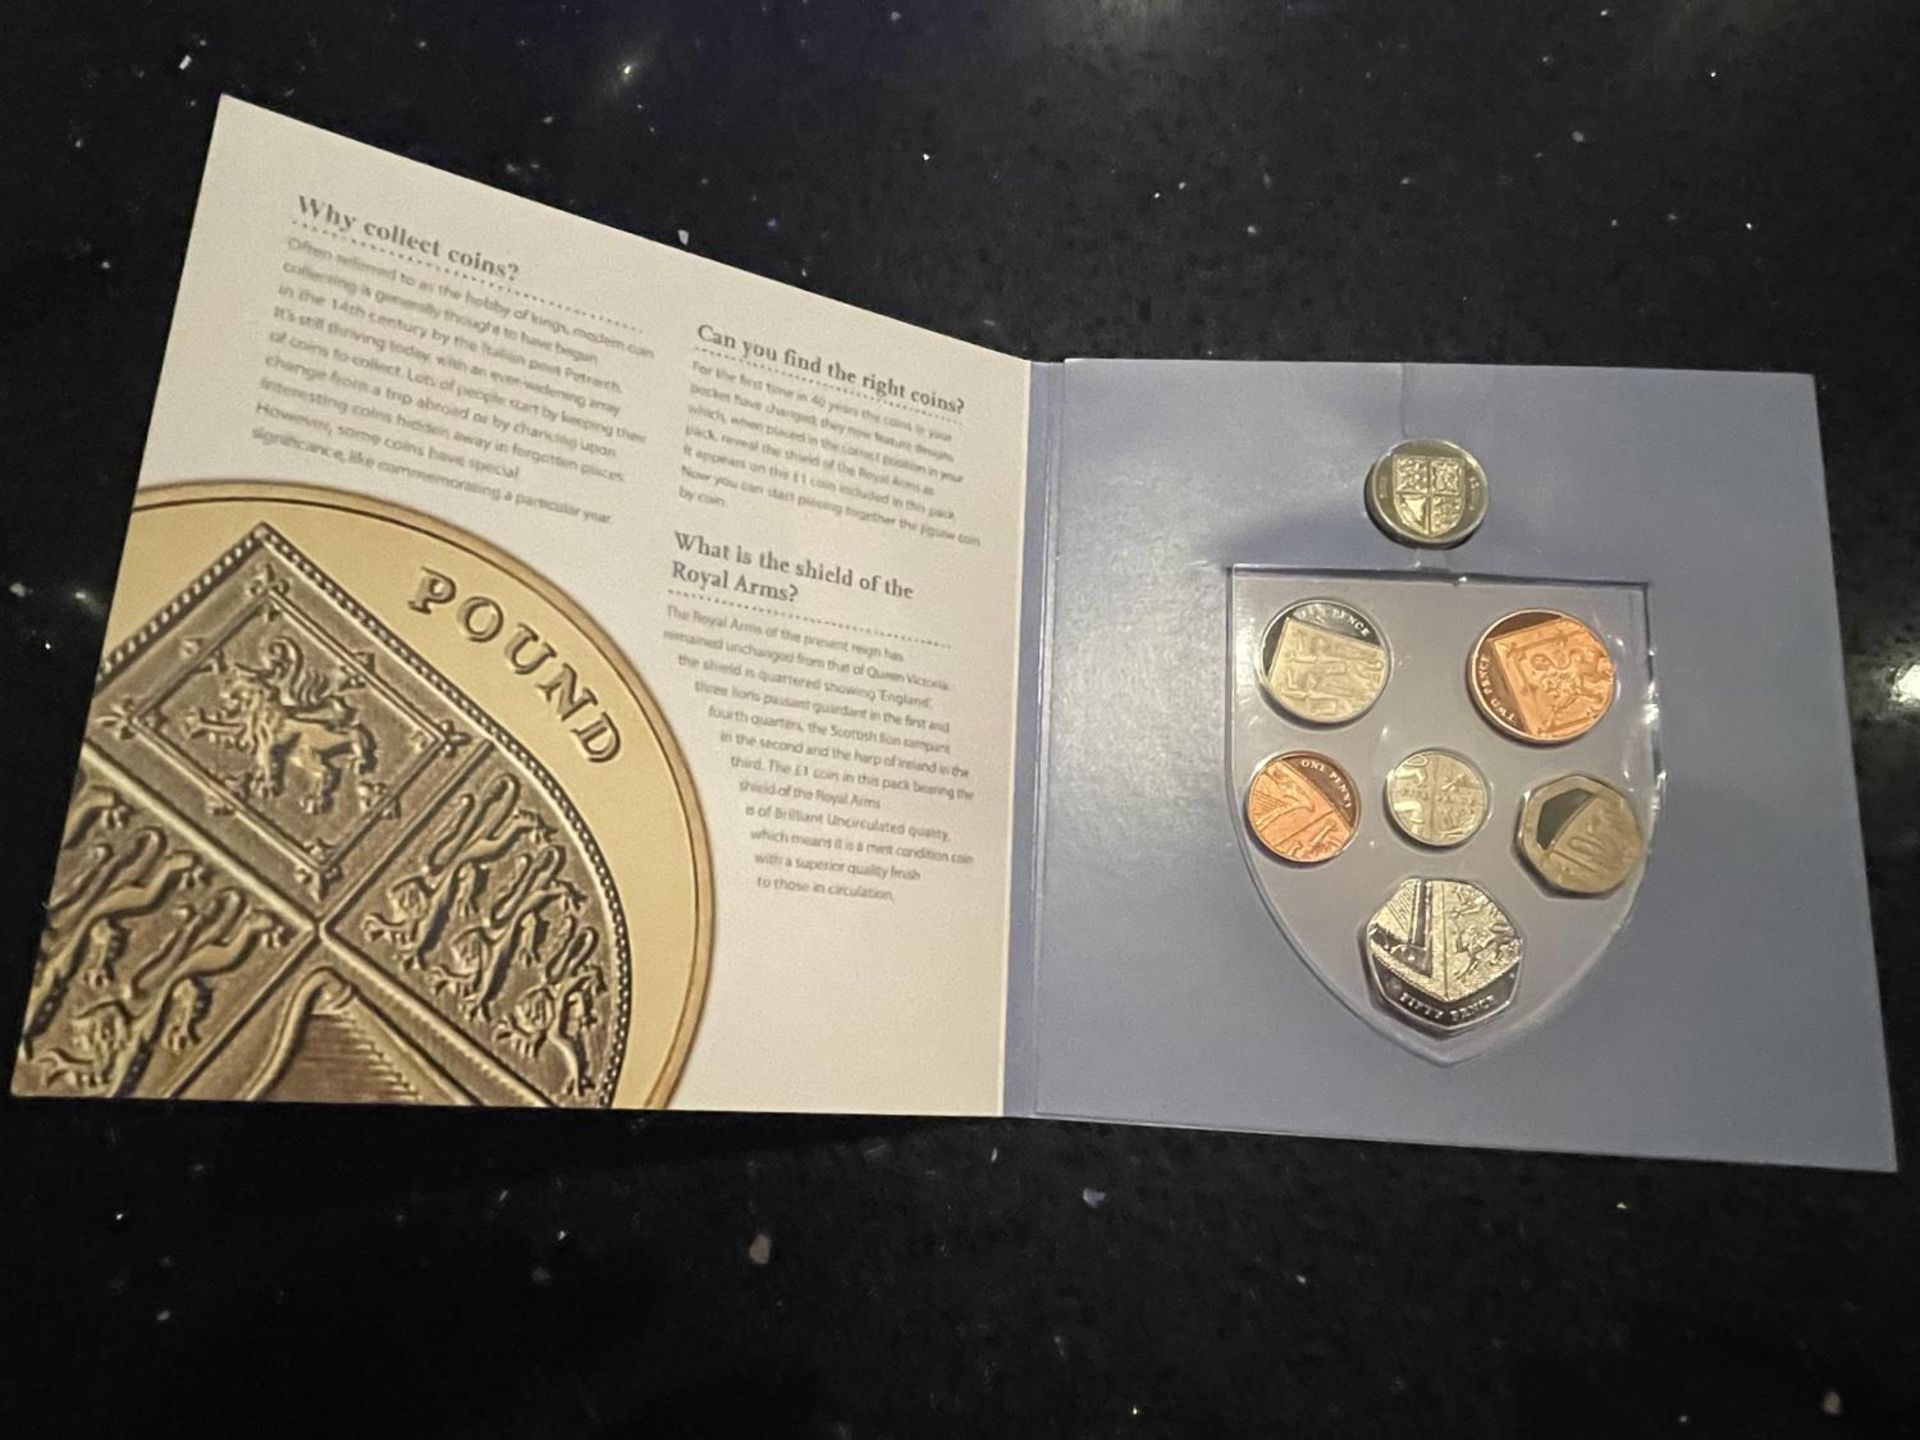 UK , ROYAL MINT , 2009 , COIN SET OF 7 “CREATE A SET” . PRISTINE CONDITION - Image 2 of 3